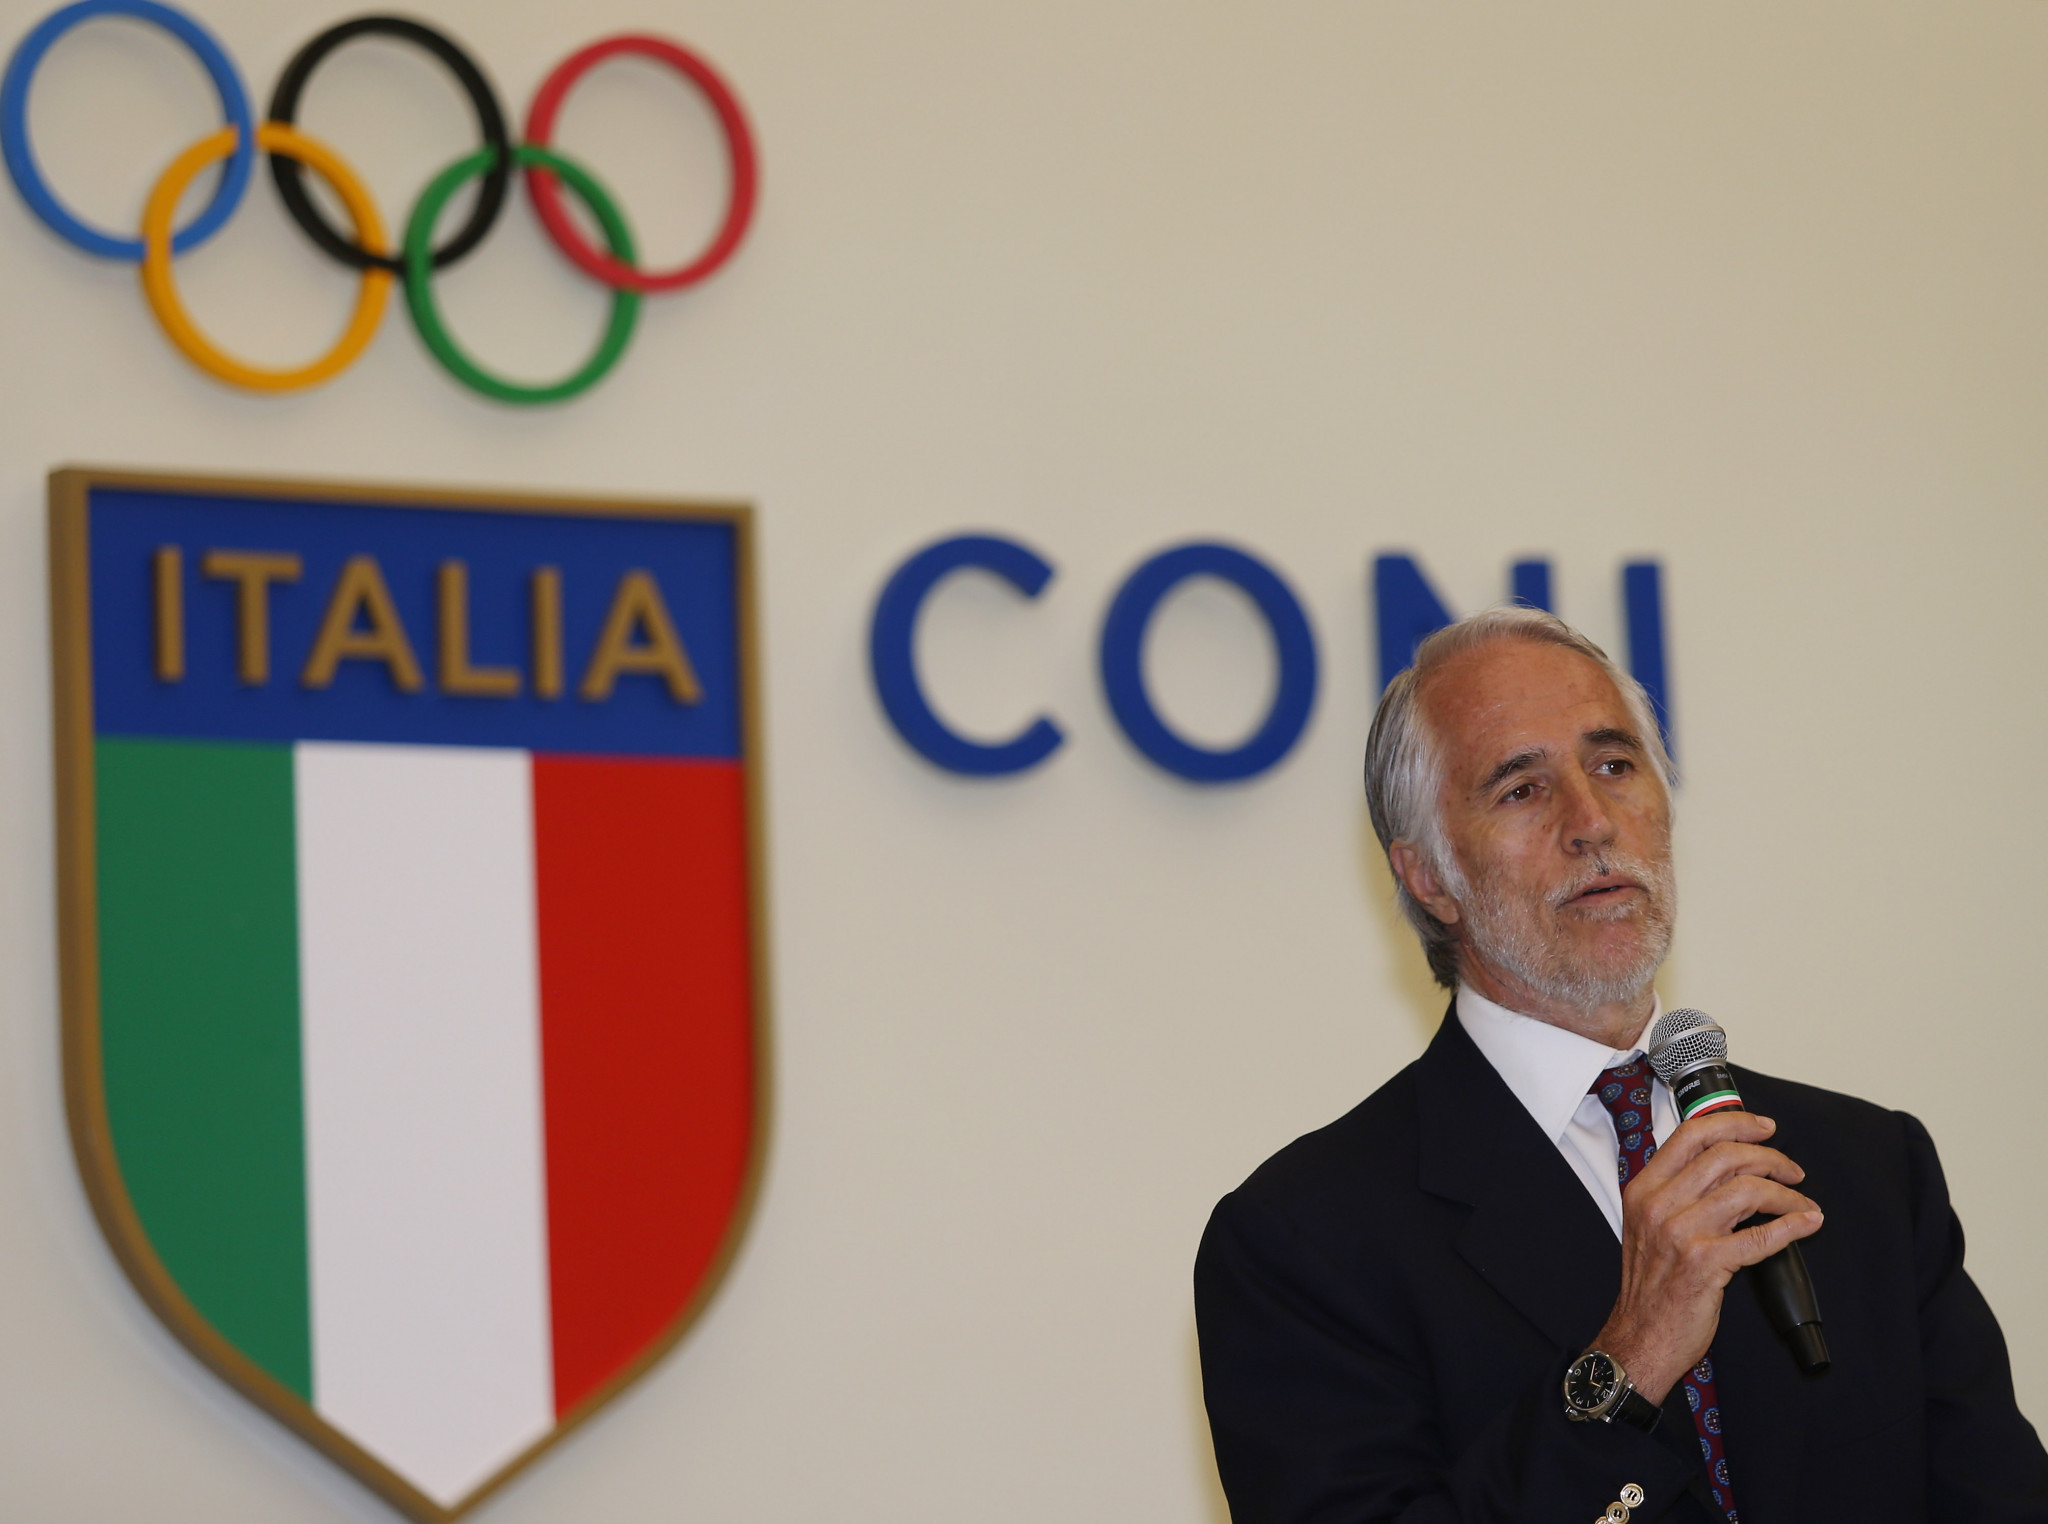 Milan, Turin and Cortina d'Ampezzo submit plans to host 2026 Winter Olympics